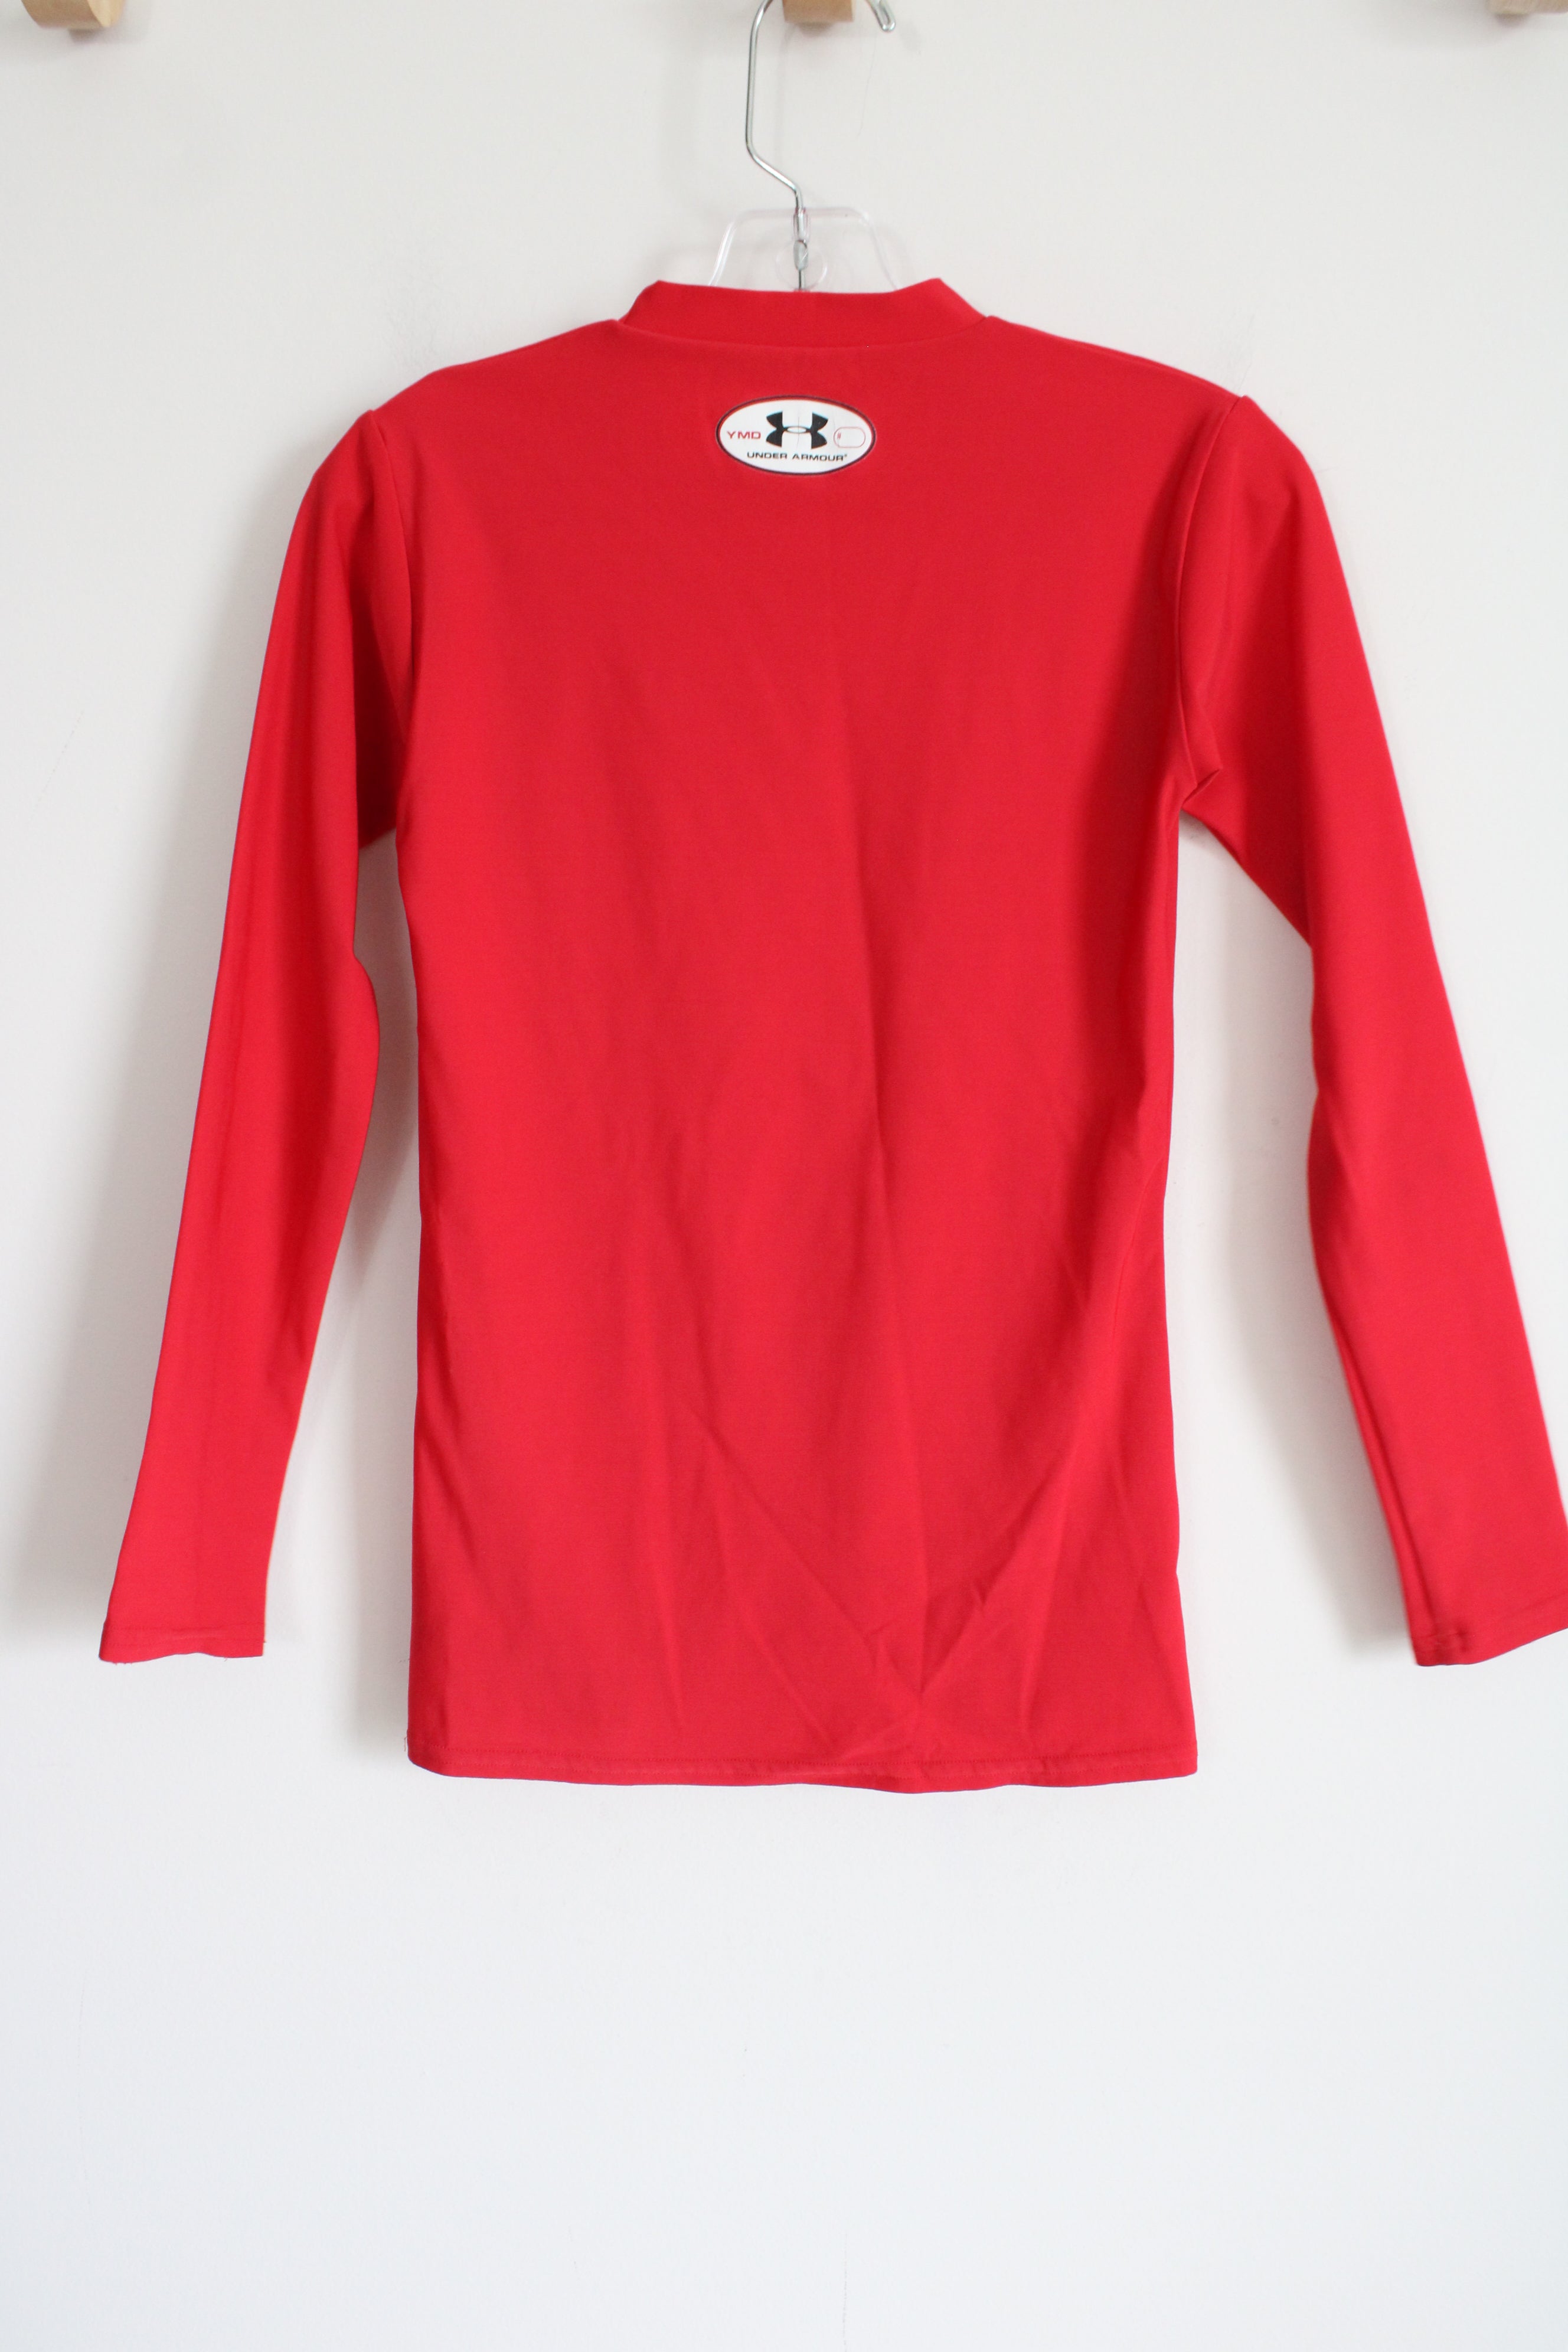 Under Armour Mock Neck Shirt | Youth M (10/12)